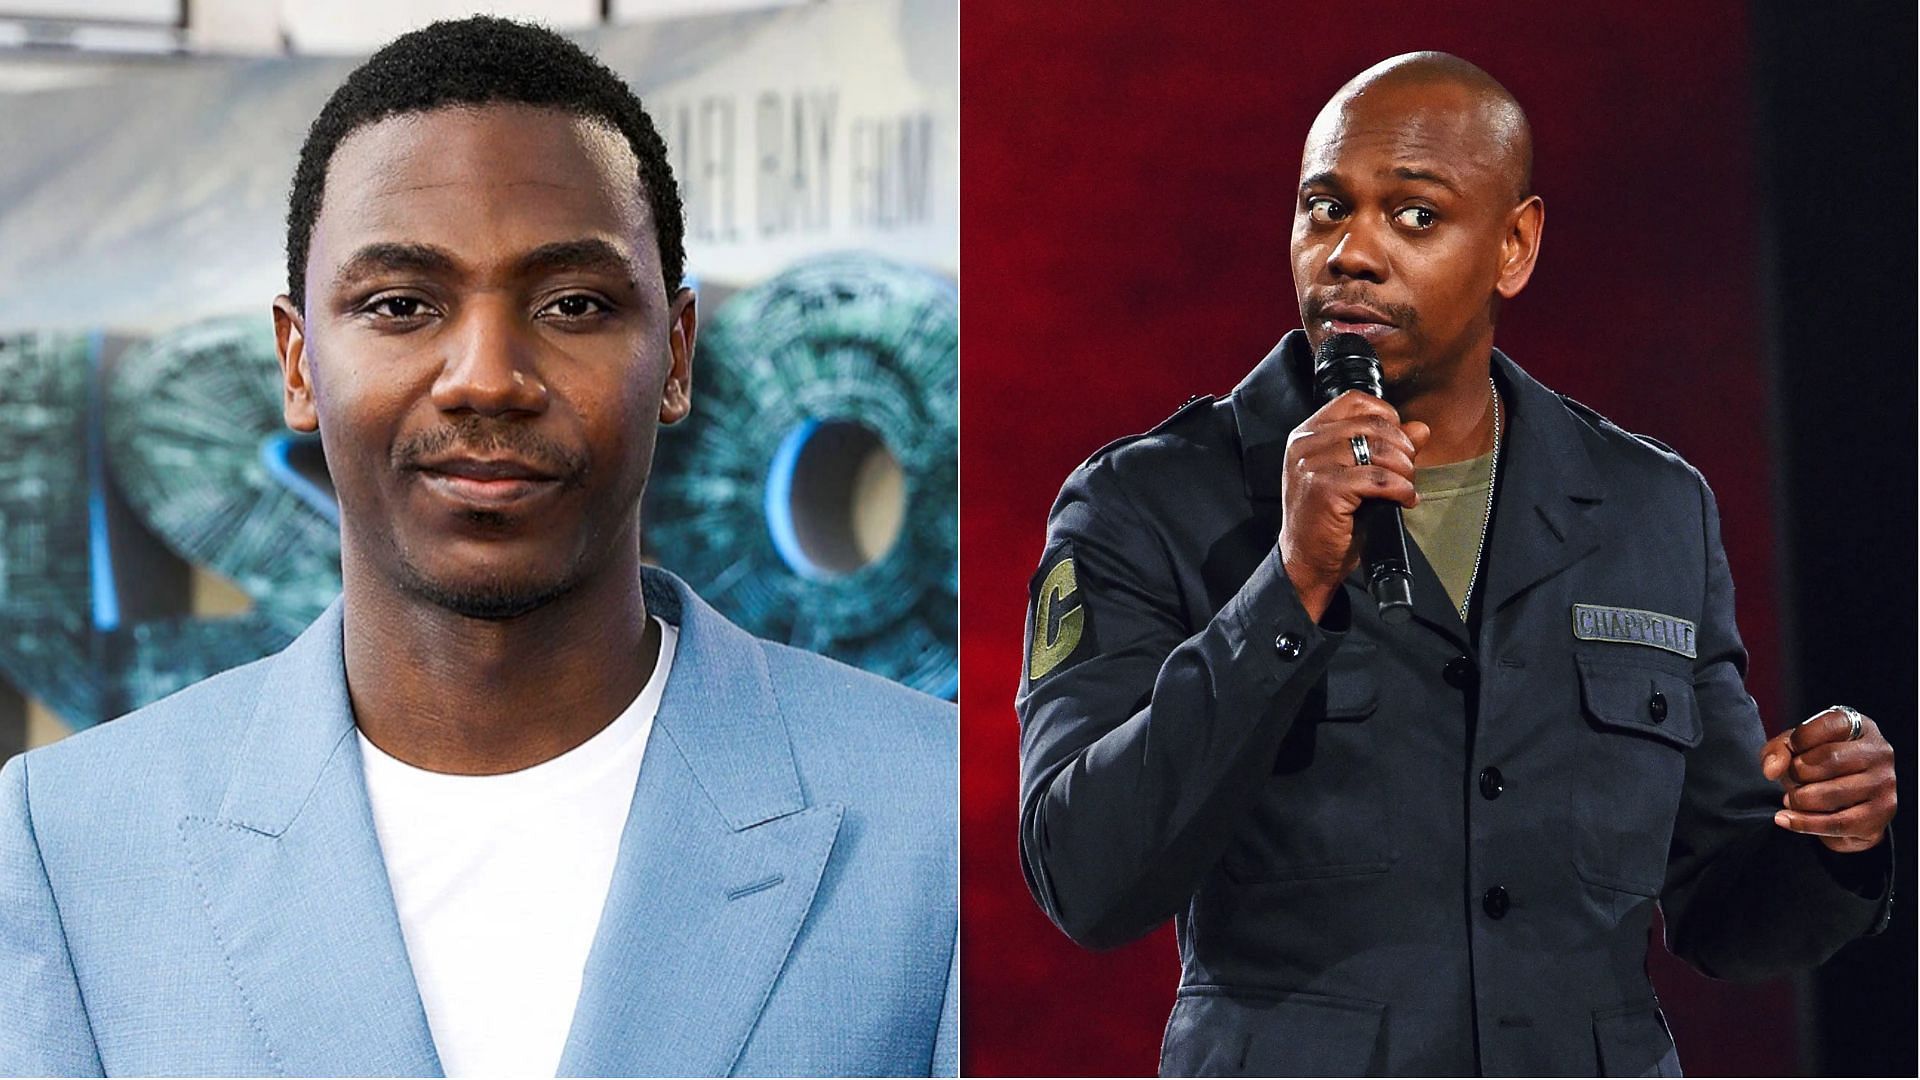 Jerrod Carmichael revealed that when he came out, his 15-year-old niece was the only one who acknowledged him. (Image via Getty Images/Tim P. Whitby/Lester Cohen)